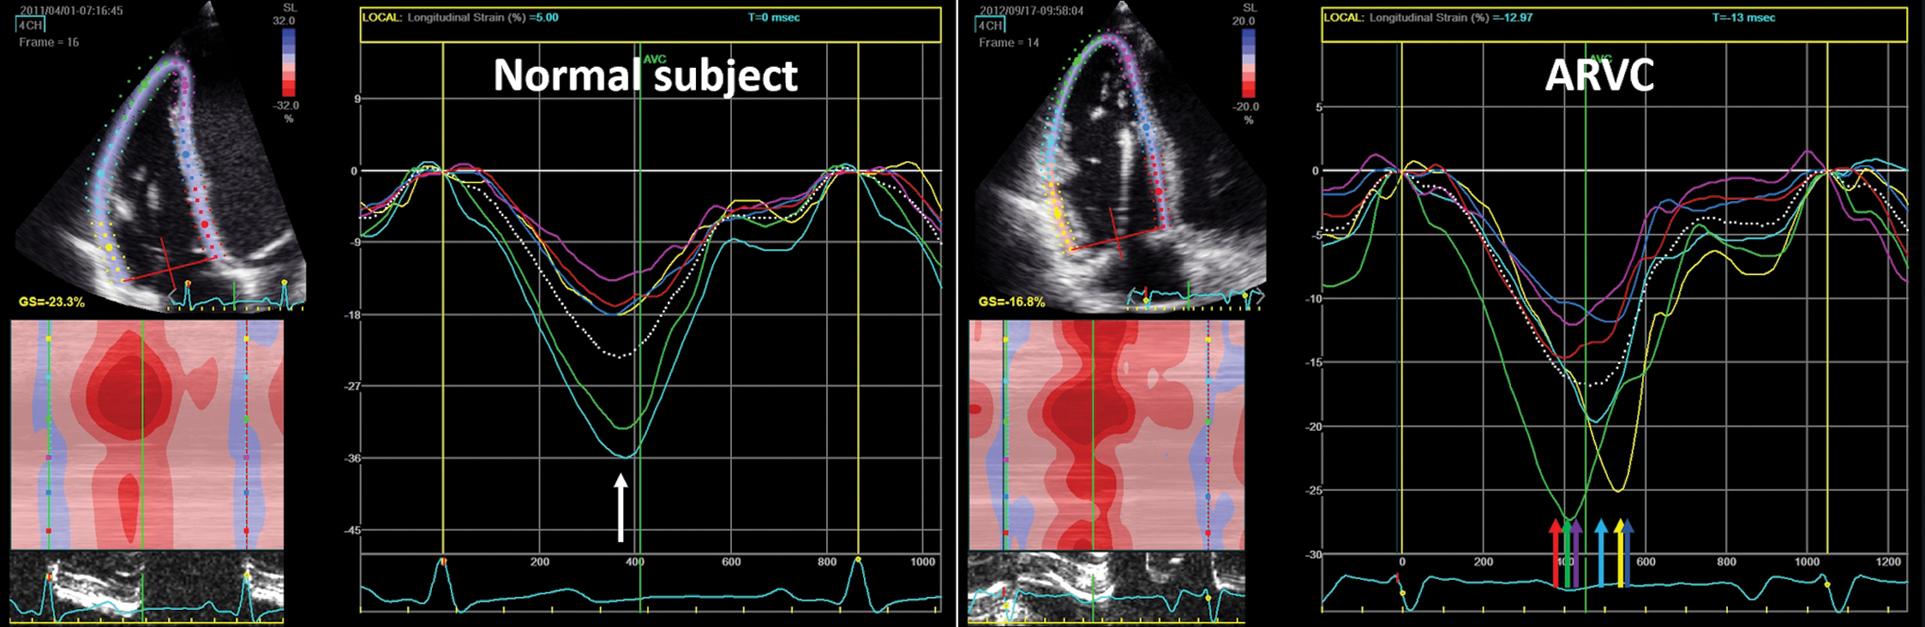 Fig. 9.7, Assessment of right ventricular (RV) dyssynchrony. In a normal subject (left panel) all six RV segments reach the peak strain at the same time (white arrow) . In a patient with genetically proven arrhythmogenic RV cardiomyopathy (ARVC, right panel) , the time from the R wave on the electrocardiogram (ECG) to peak segmental strain is highly variable (colored arrows). The standard deviation of times to peak segmental strain represents the dyssynchrony index.